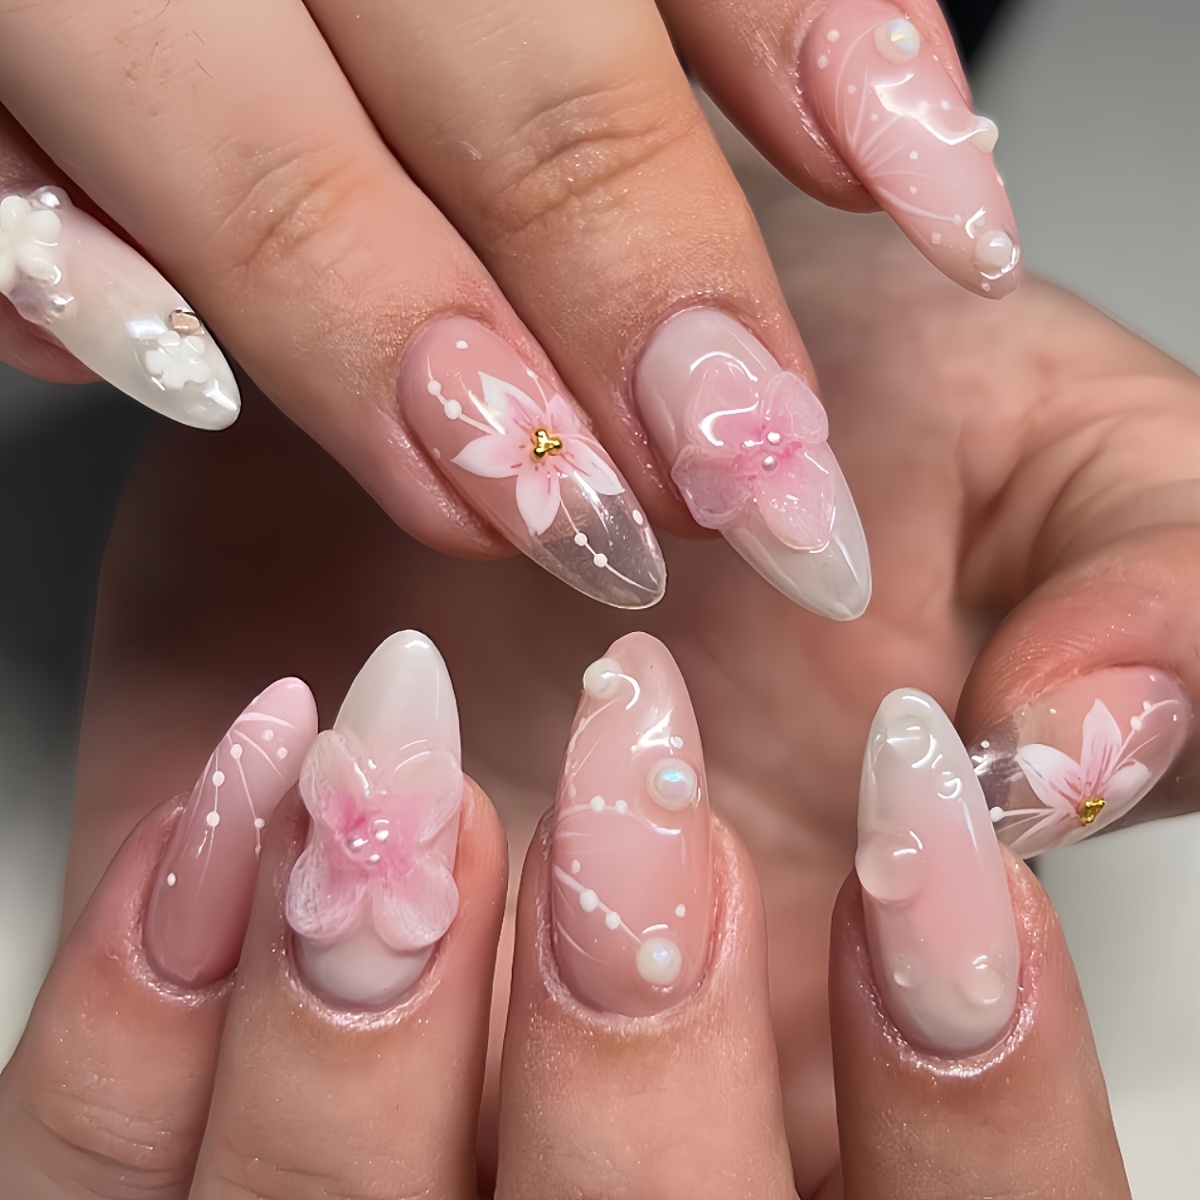 

24-piece Sweet Pink Almond-shaped Press-on Nails With 3d Floral & Pearl Accents - Glossy Finish, Perfect For Women And Girls